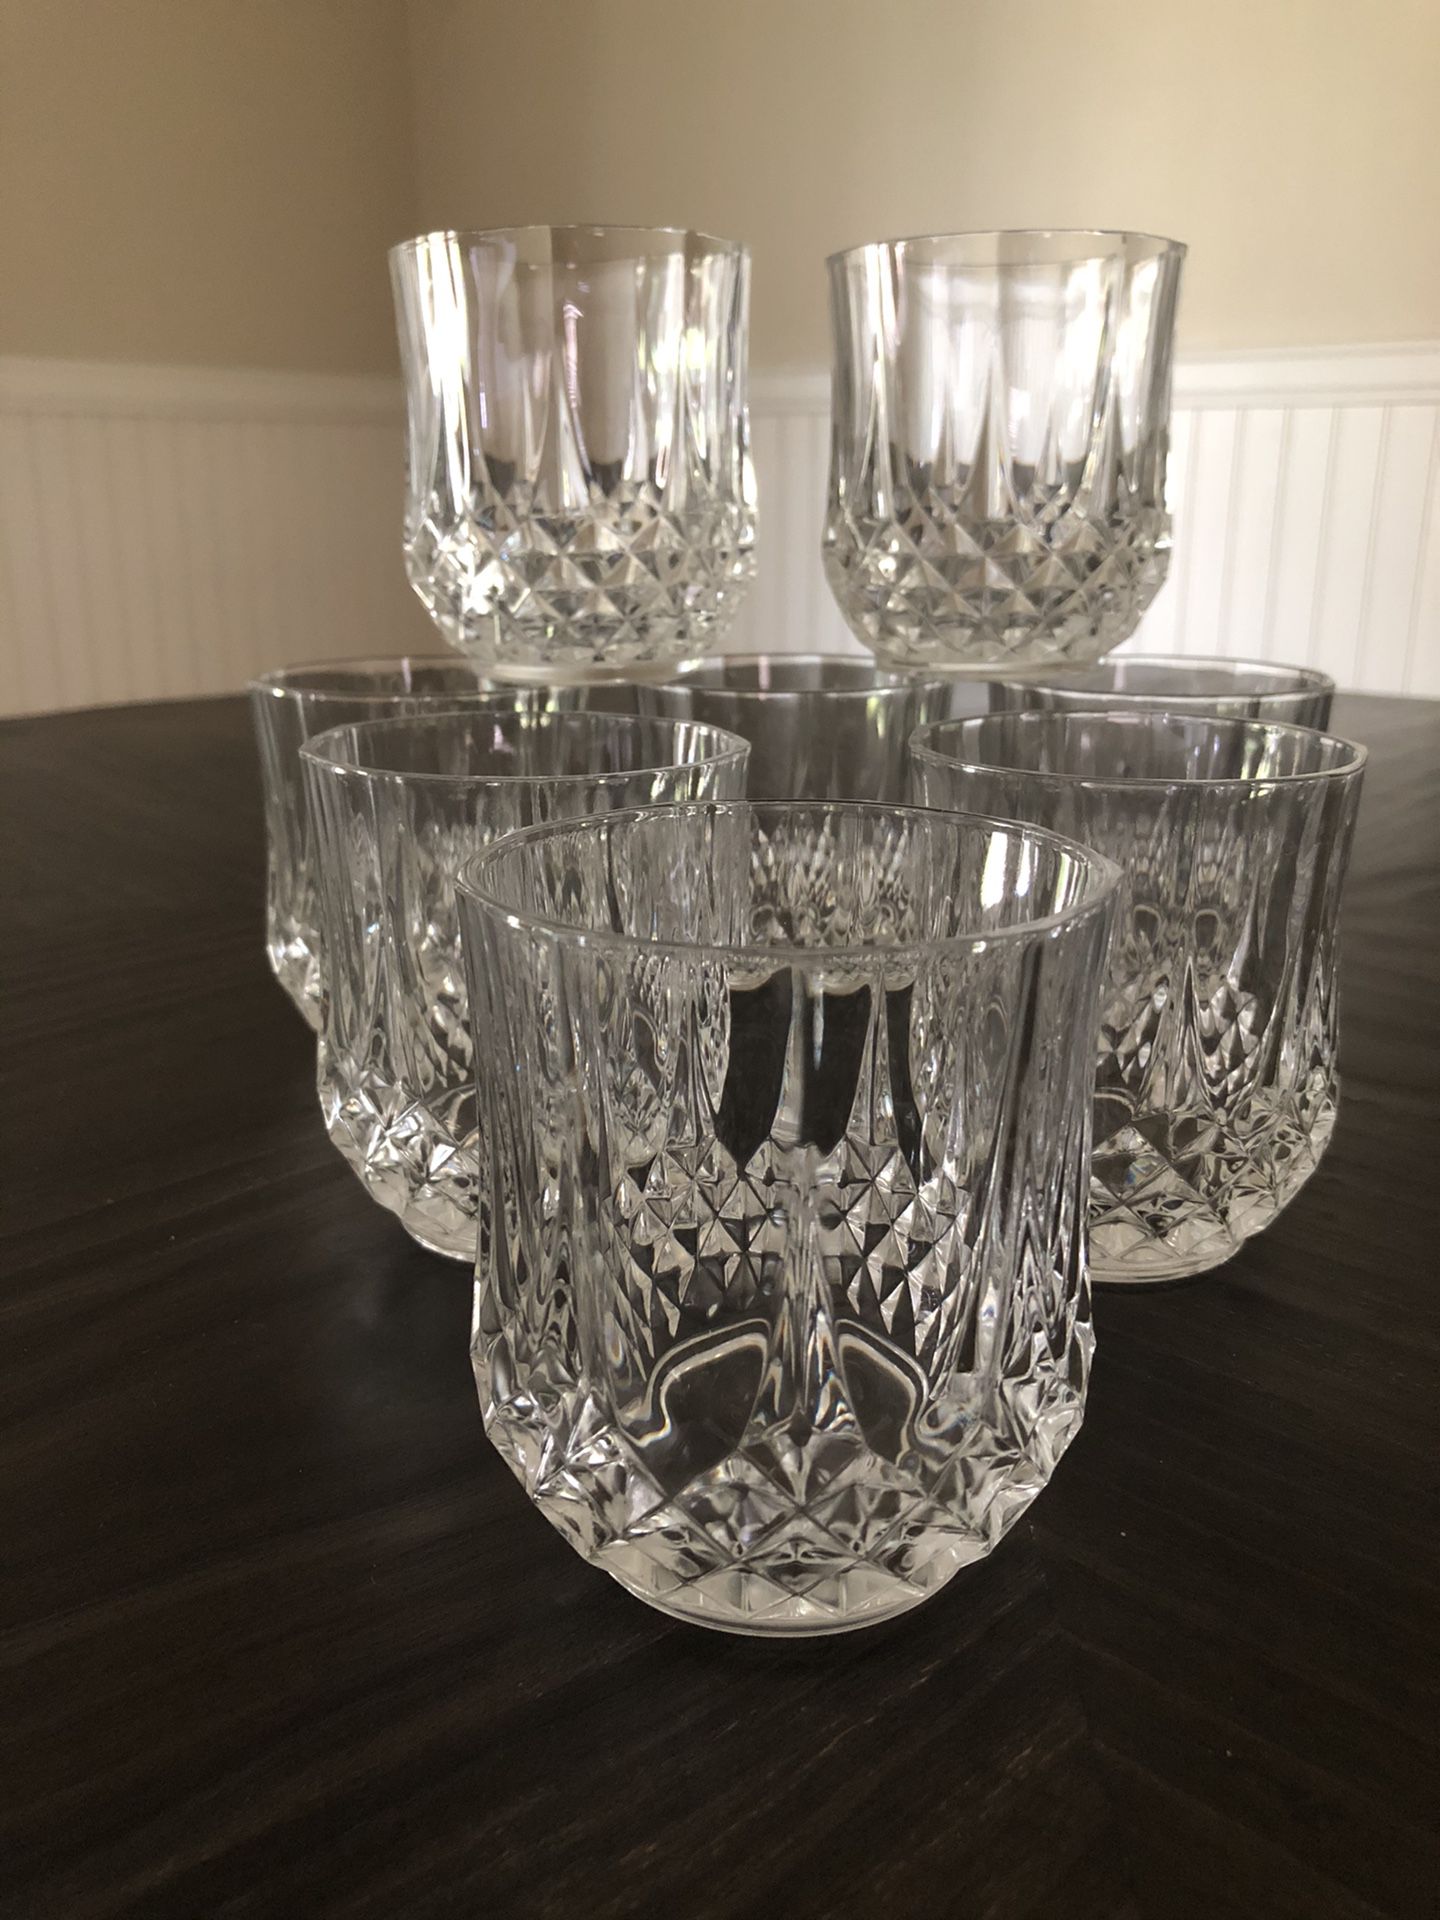 Crystal glassware from Macy’s-8 pieces